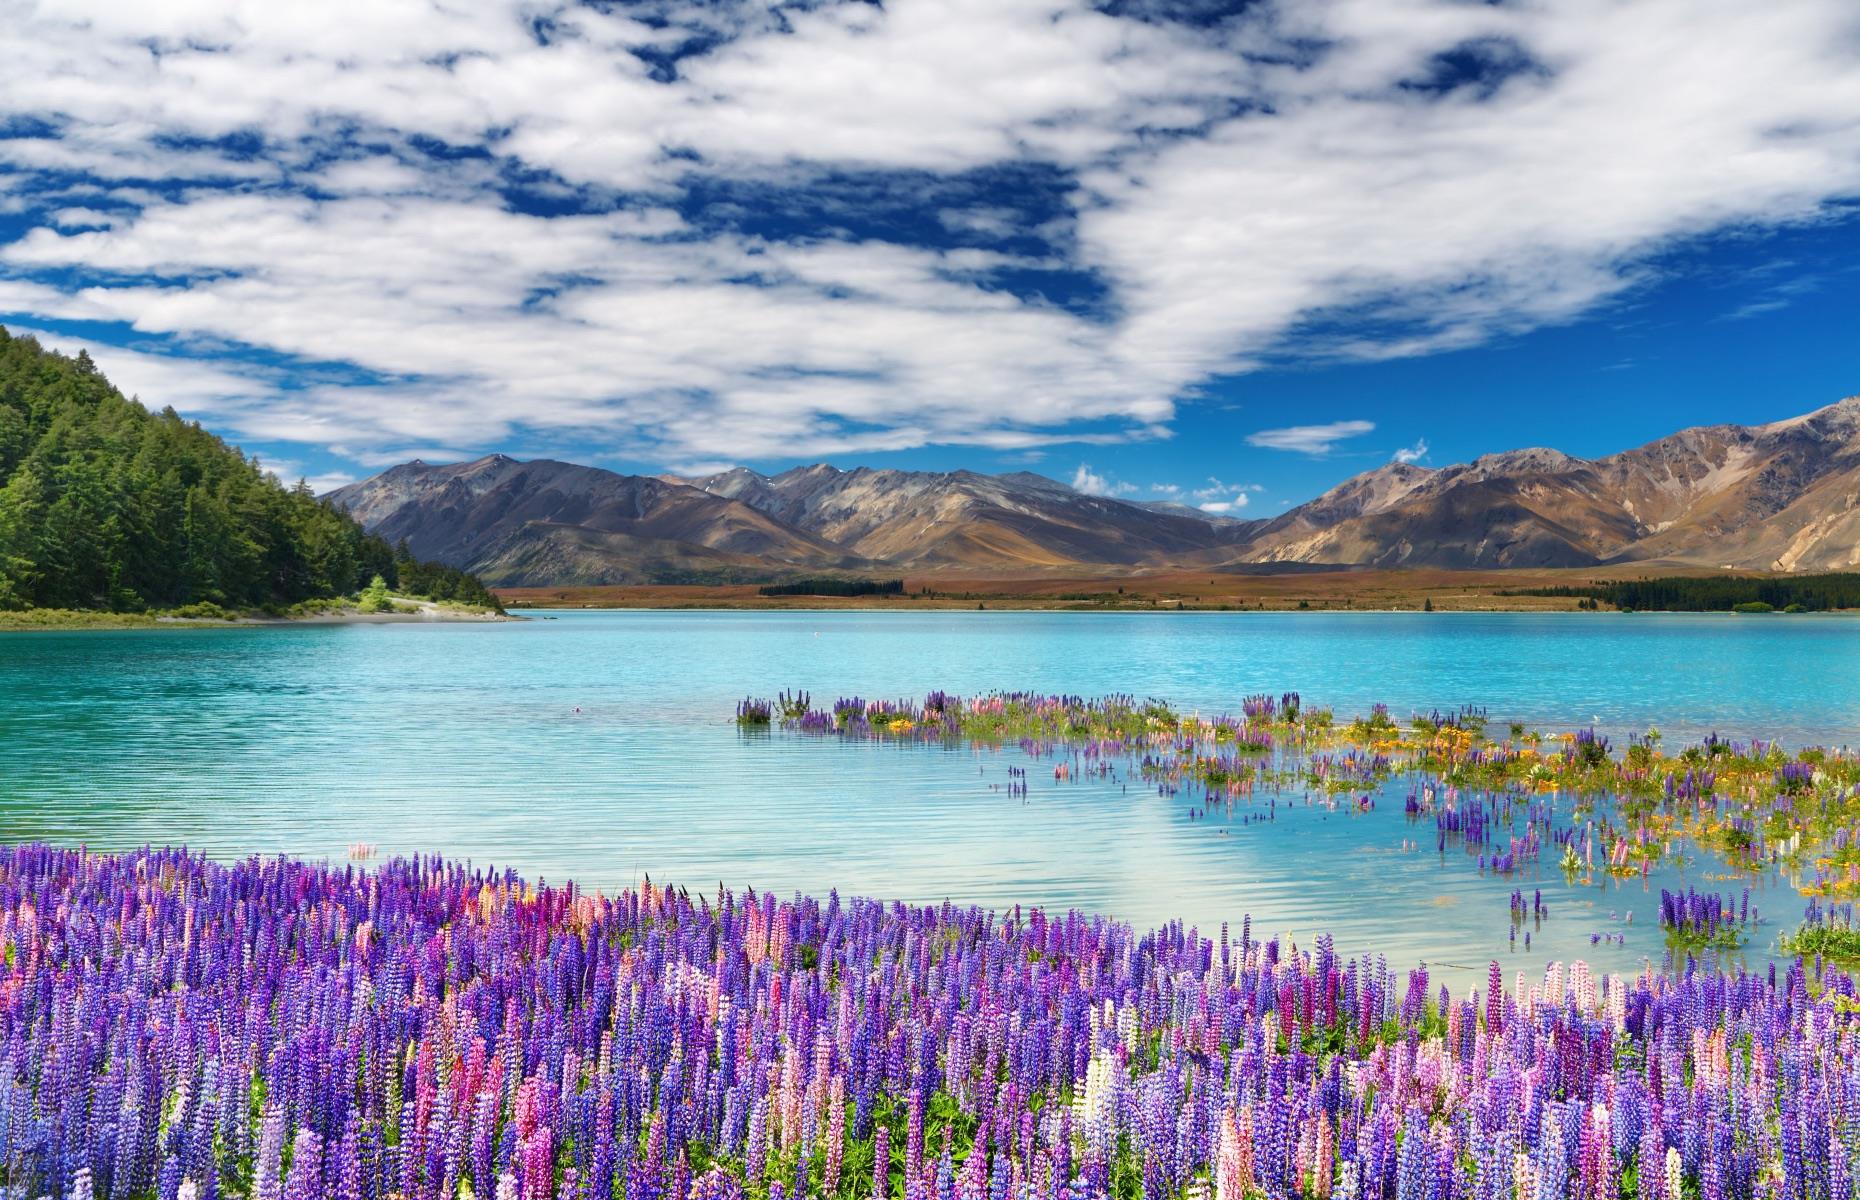 Lake Tekapo is a sight to behold. This turquoise lake in the Southern Alps, fringed by bright pink and purple lupins between November and February each year and surrounded by snow-capped peaks, is truly picturesque. The lake gets its intense colour from glacier-grounded minerals suspended in the water. Part of a Unesco Dark Sky Reserve, turn your eyes skywards as night falls for some of the best views of space from Earth.